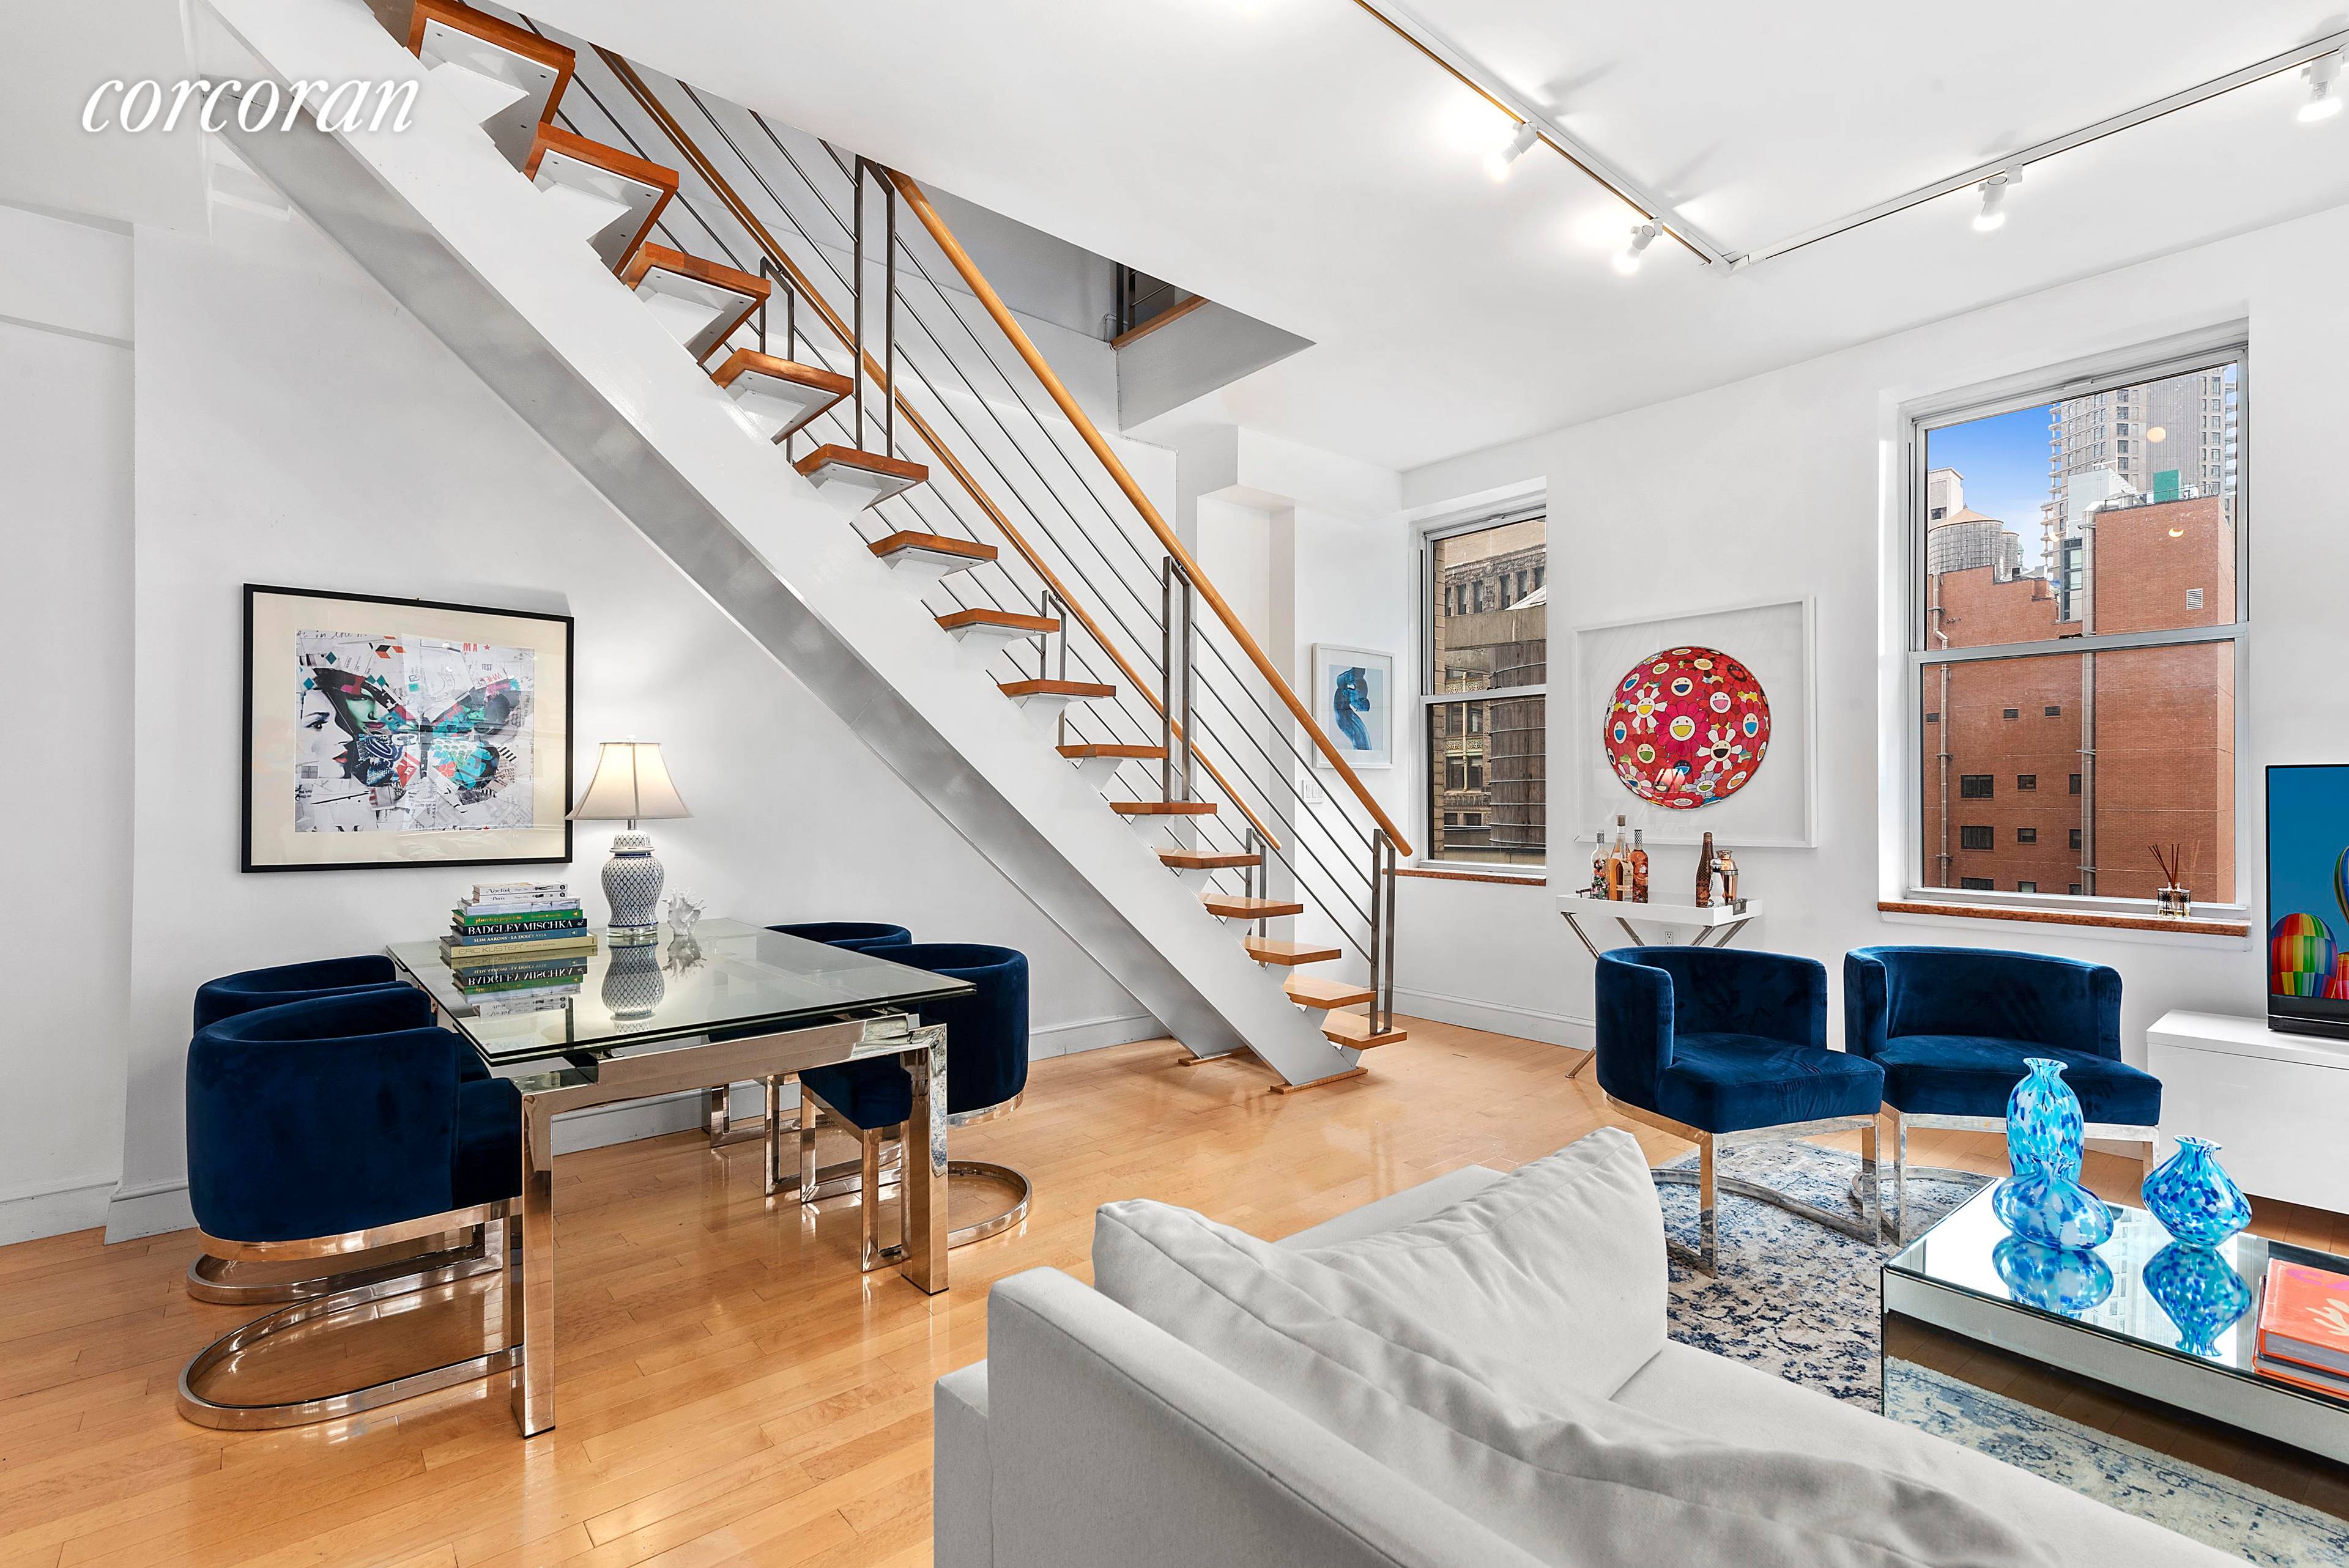 A home in the sky, this sublime duplex at Liberty Tower, 55 Liberty Street, New York NY 10005, feels like a townhouse.